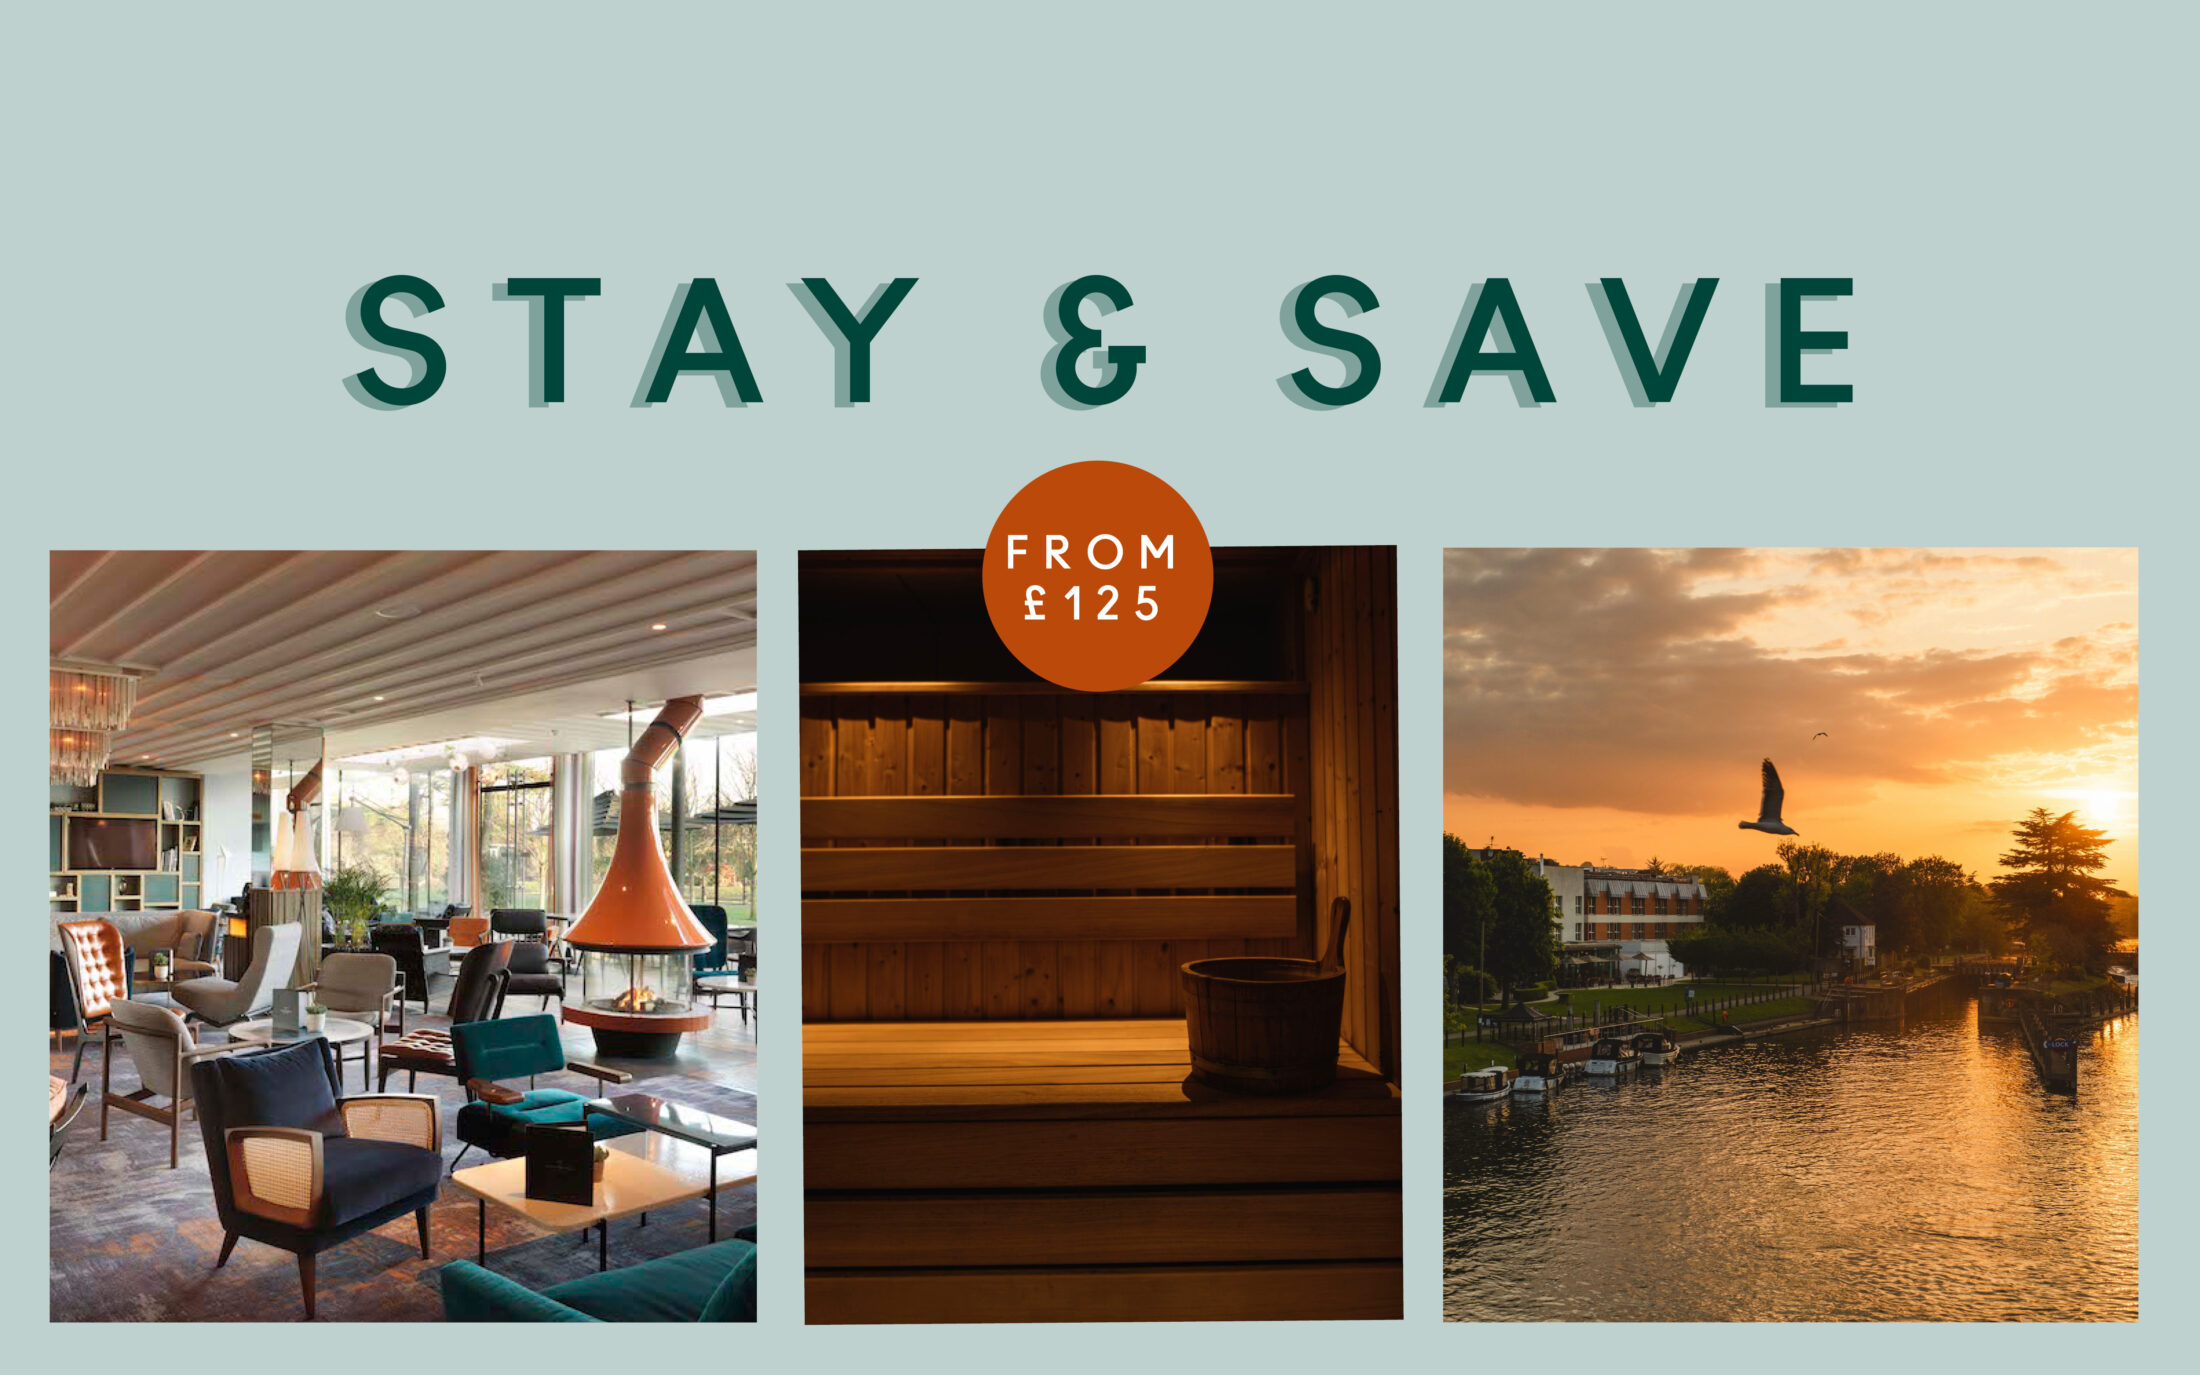 Stay & Save at The Runnymede on Thames Hotel & Spa